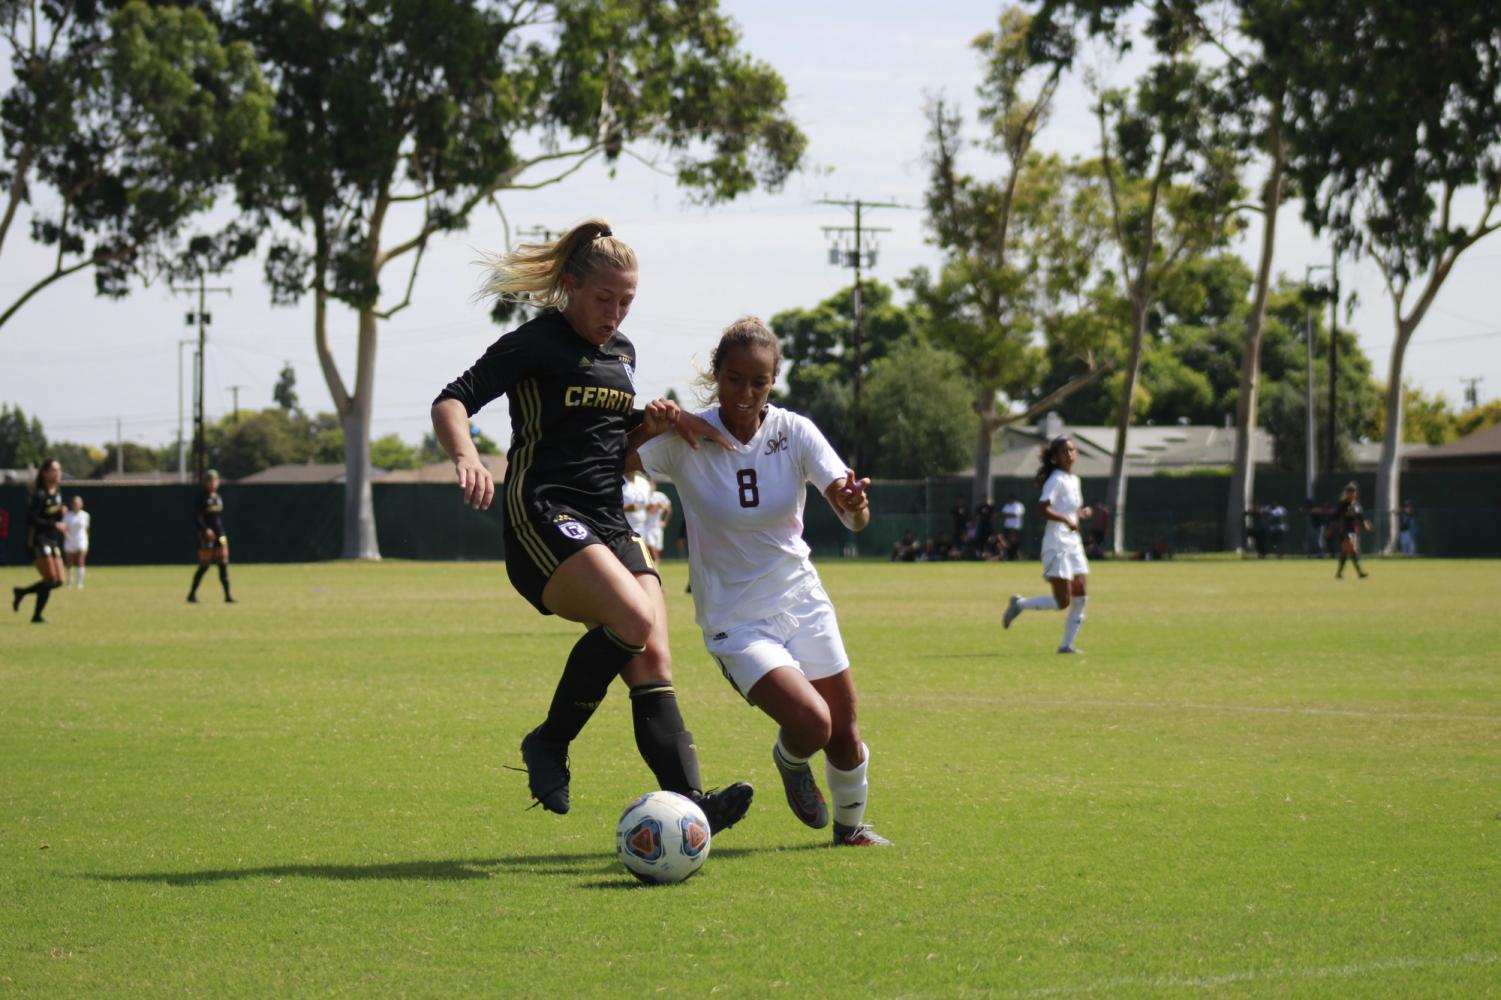 Sophomore forward No. 10 Sydney Carr shielding the ball away from one of the Southwestern College defenders. Carr had two goals and an assist in the match-up at Cerritos College against Southwestern College on Sept. 30, 2018.